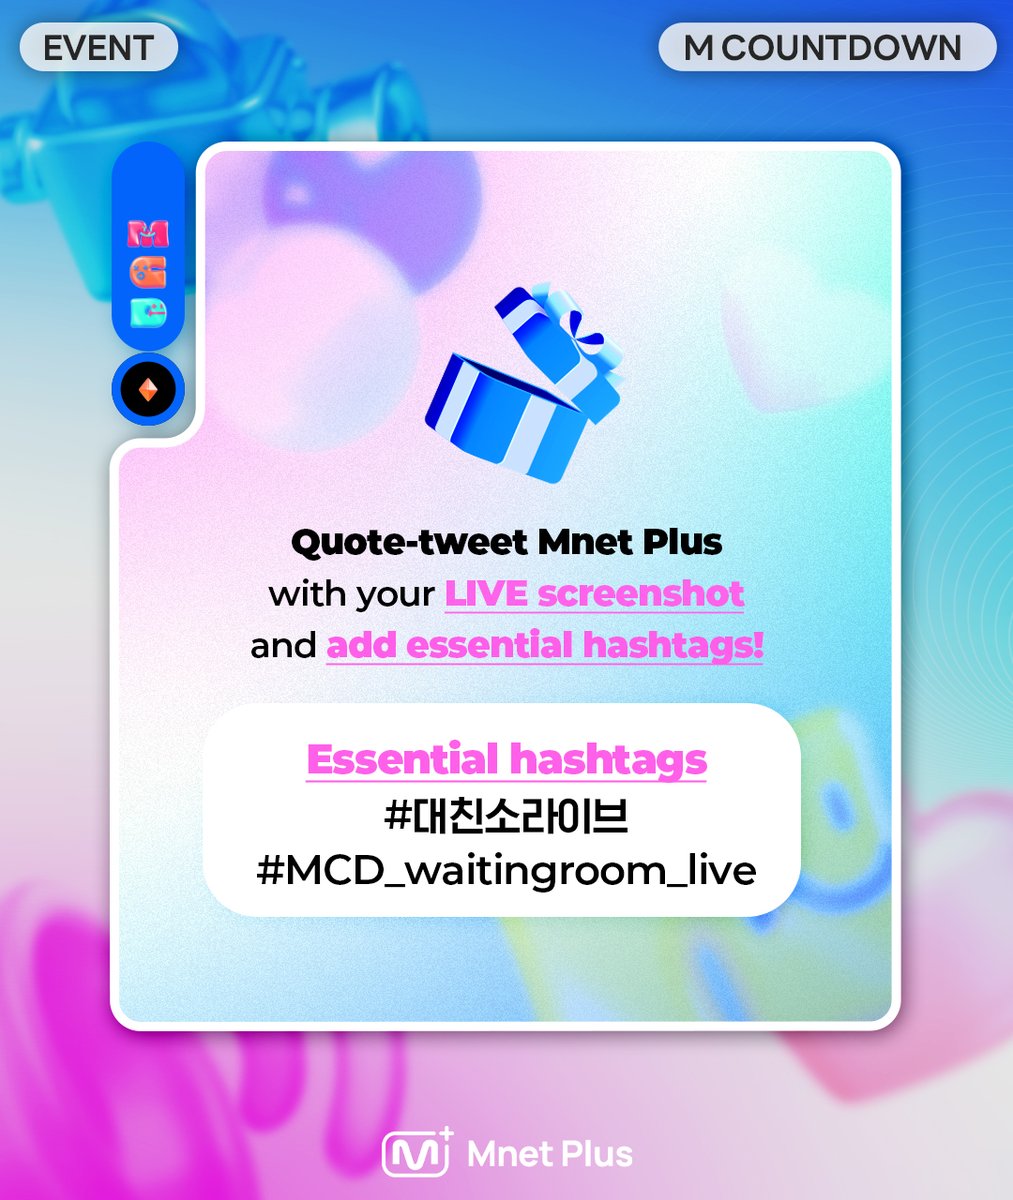 [#MCD_waitingroom_live] #daechinso_on_thursday📺

3MC 100 Days Celebration Live🎉
Check out the Waiting Room Live event in advance👀
👉 bit.ly/daechinso_EP838

📌Only available on 𝗠𝗻𝗲𝘁 𝗣𝗹𝘂𝘀

#Mcountdown #MnetPlus #daechinso
@MnetMcountdown @ZB1_official @BOYNEXTDOOR_KOZ